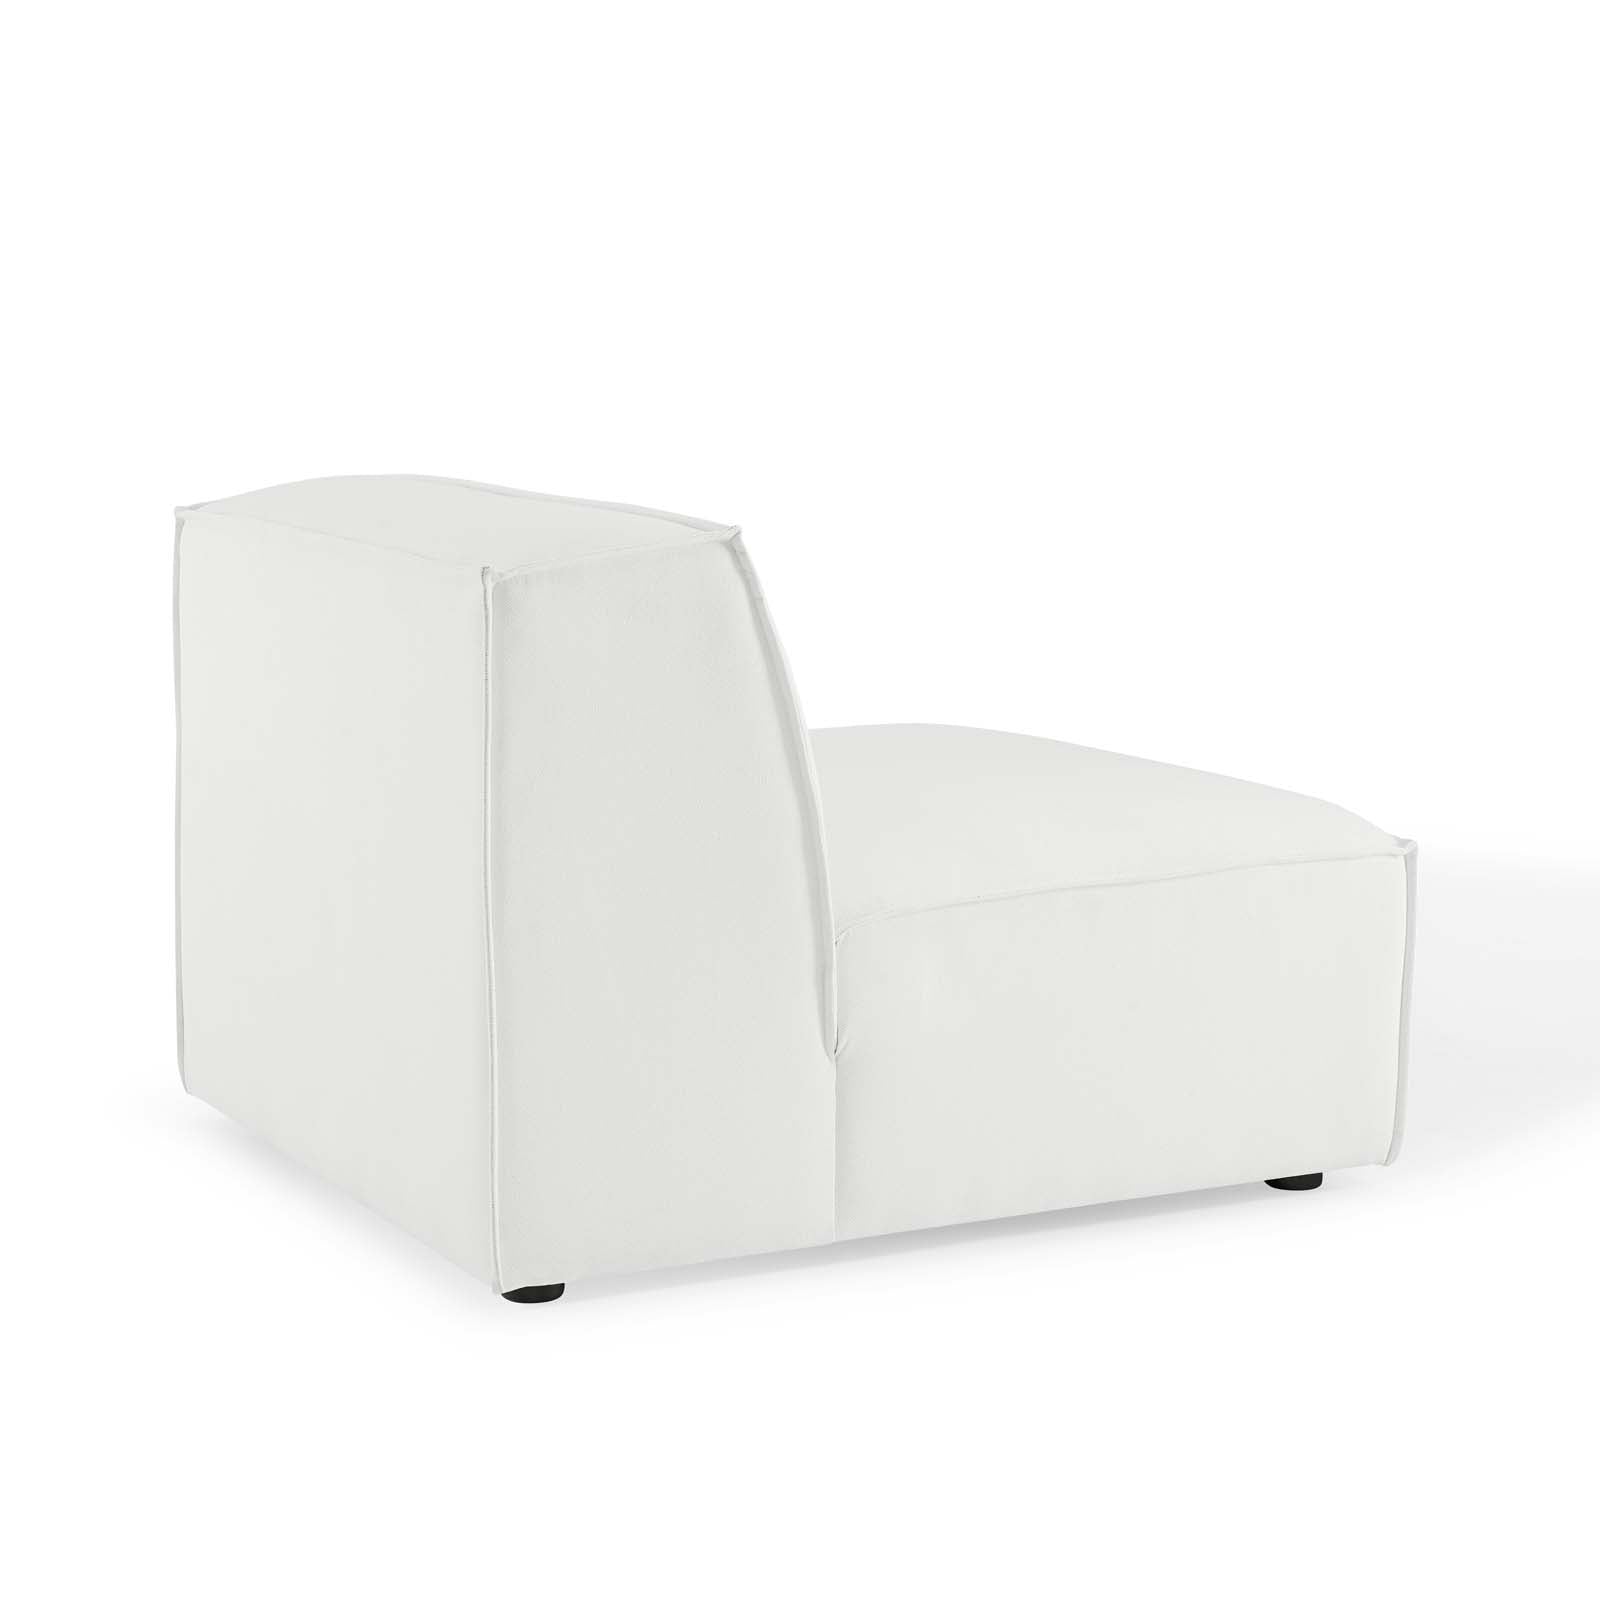 Restore Sectional Sofa Armless Chair - East Shore Modern Home Furnishings